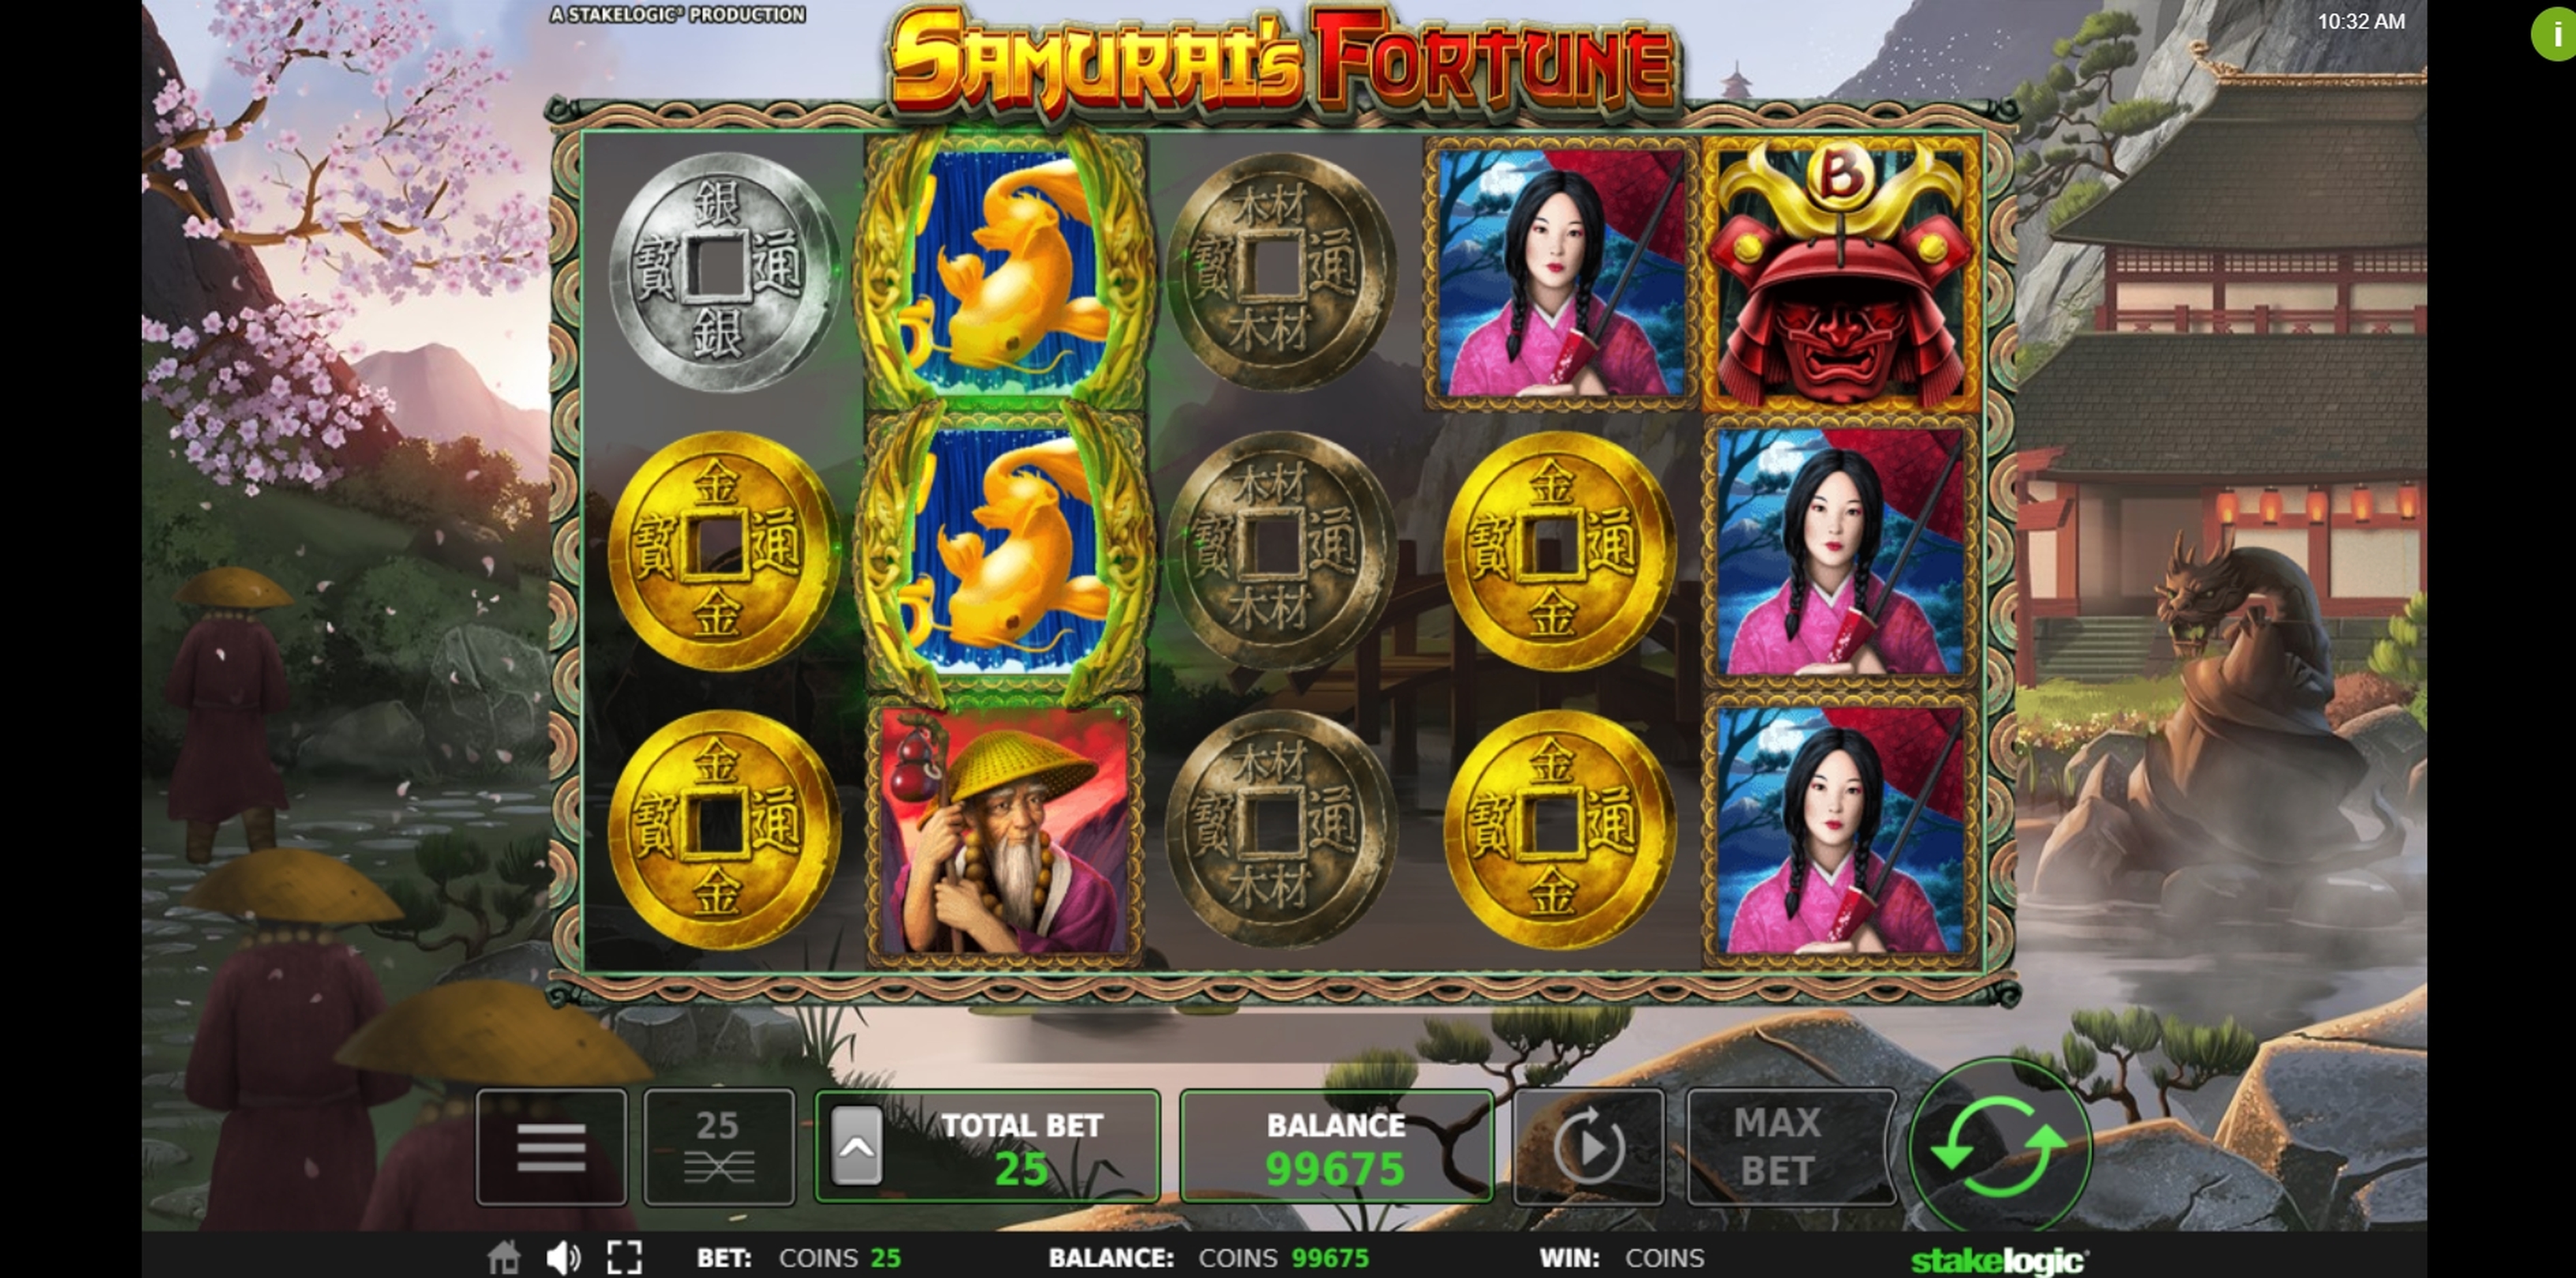 Win Money in Samurai's Fortune Free Slot Game by Stakelogic